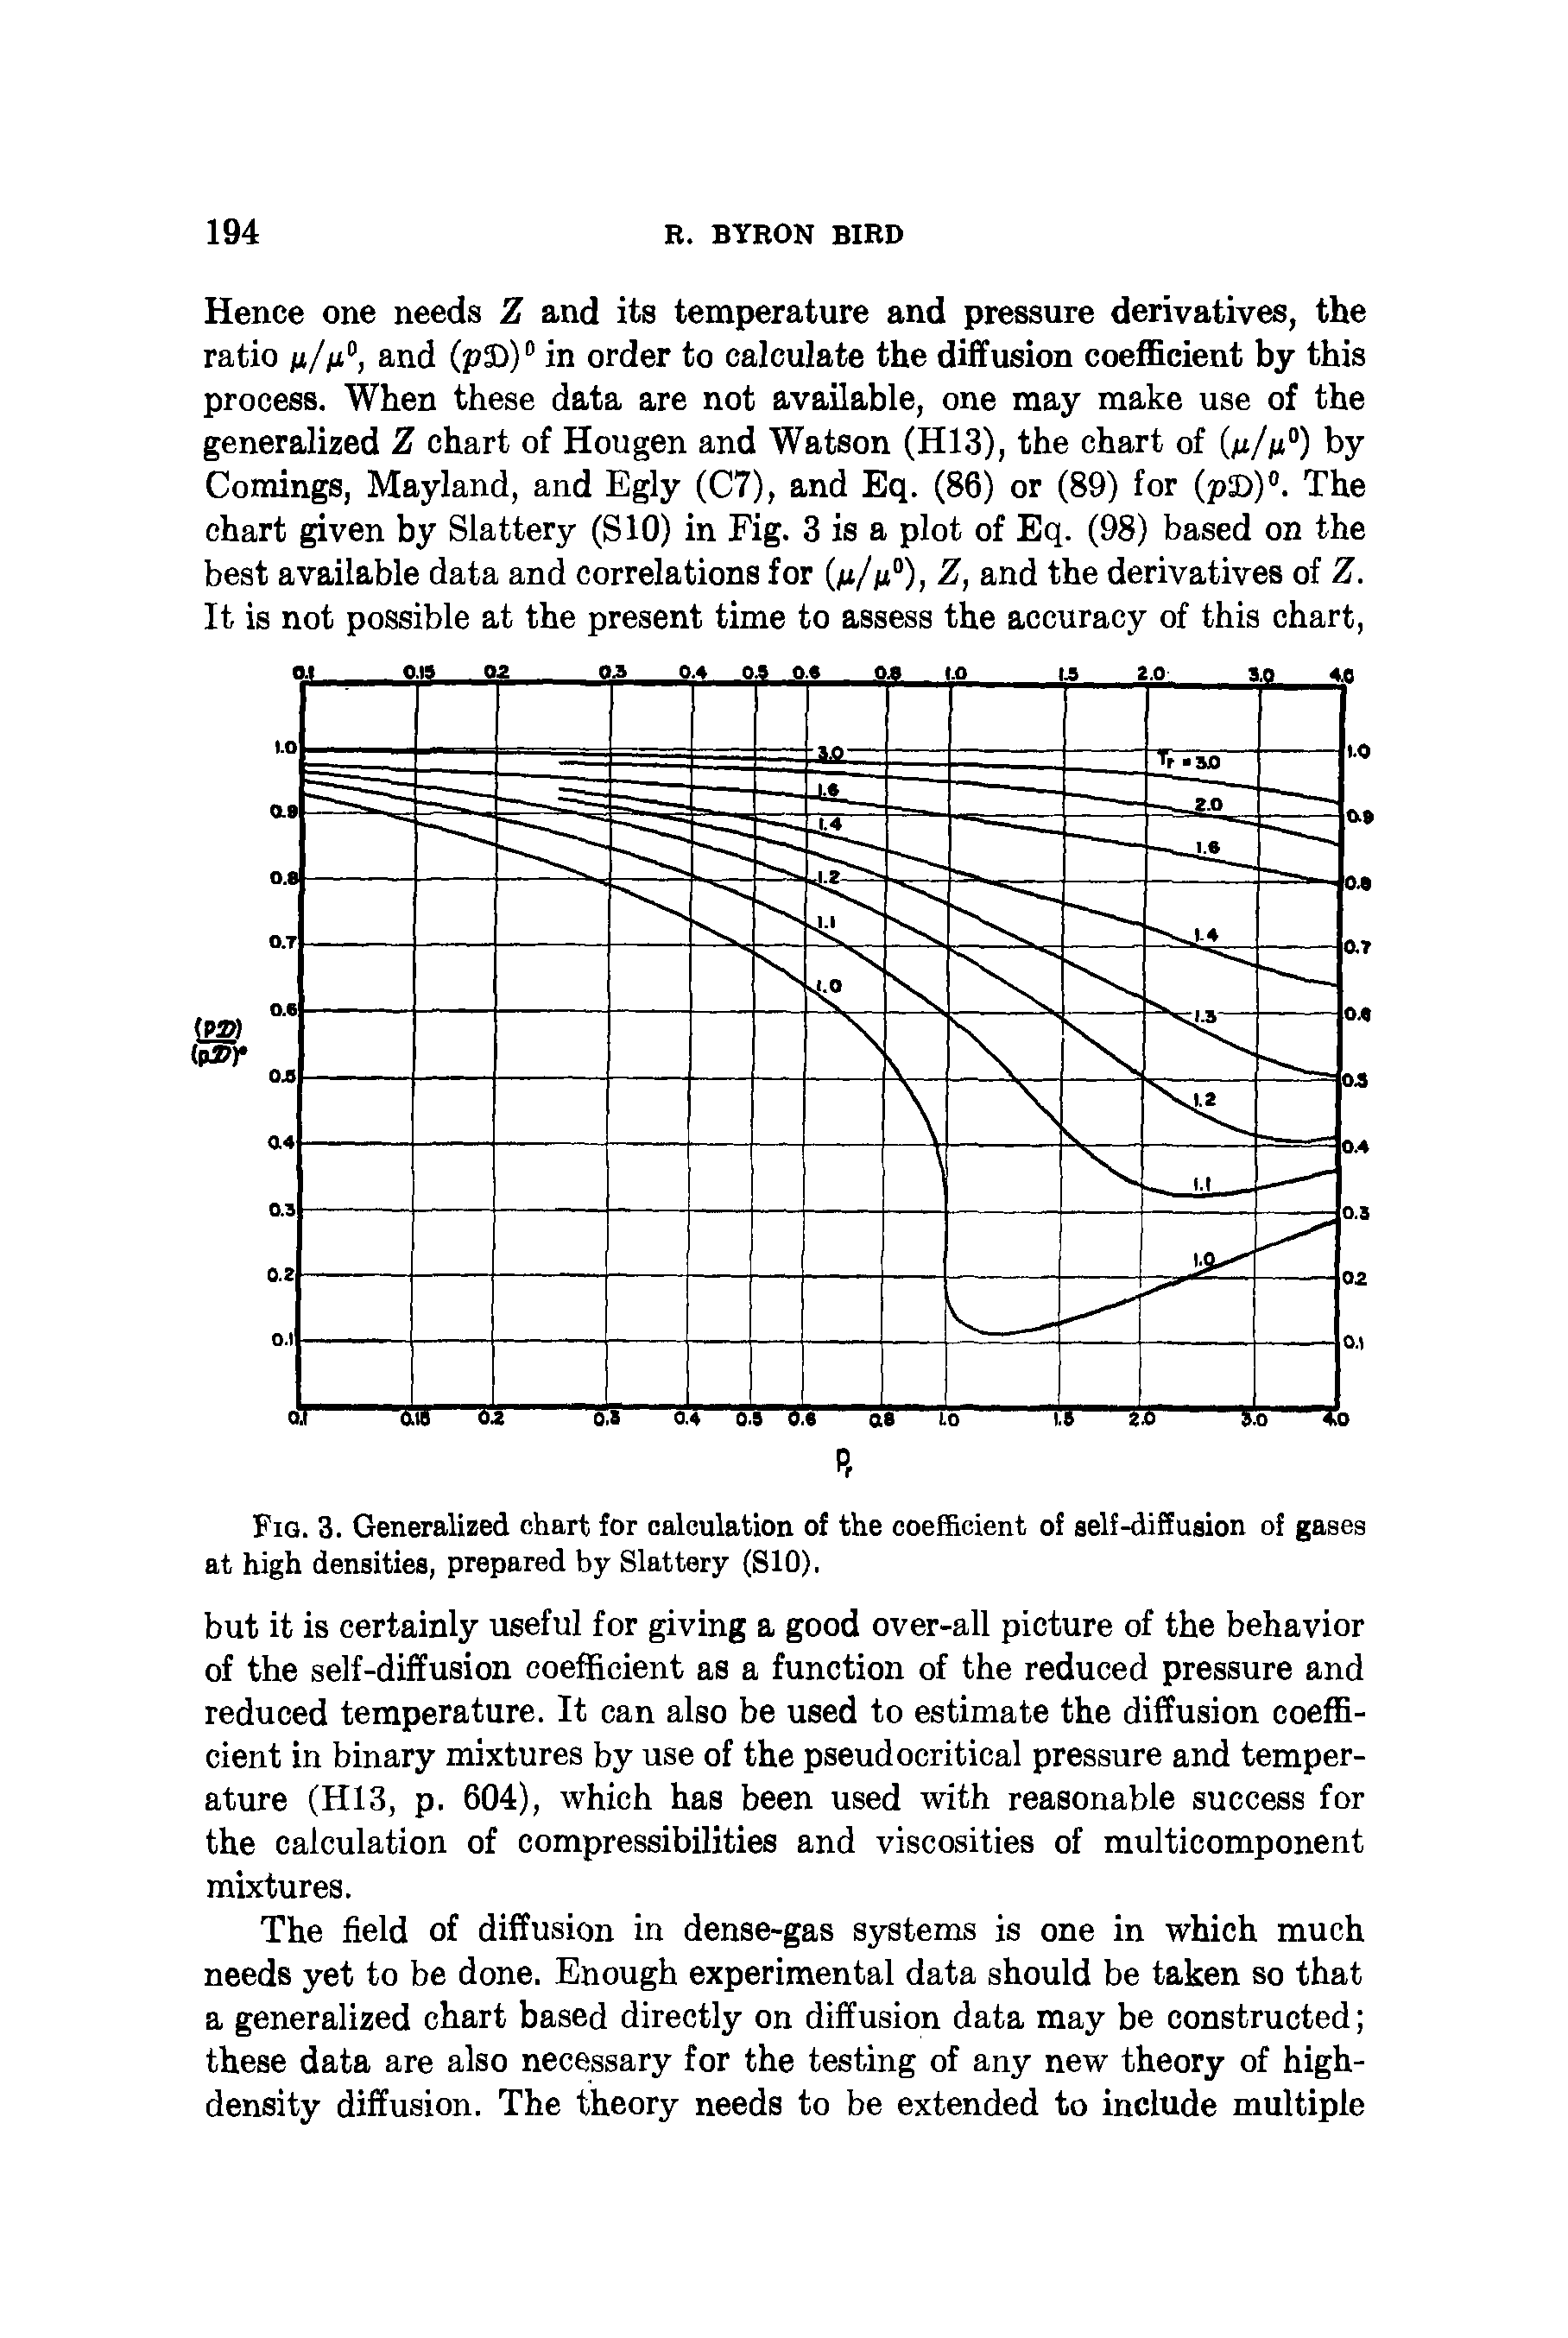 Fig. 3. Generalized chart for calculation of the coefficient of self-diffusion of gases at high densities, prepared by Slattery (S10),...